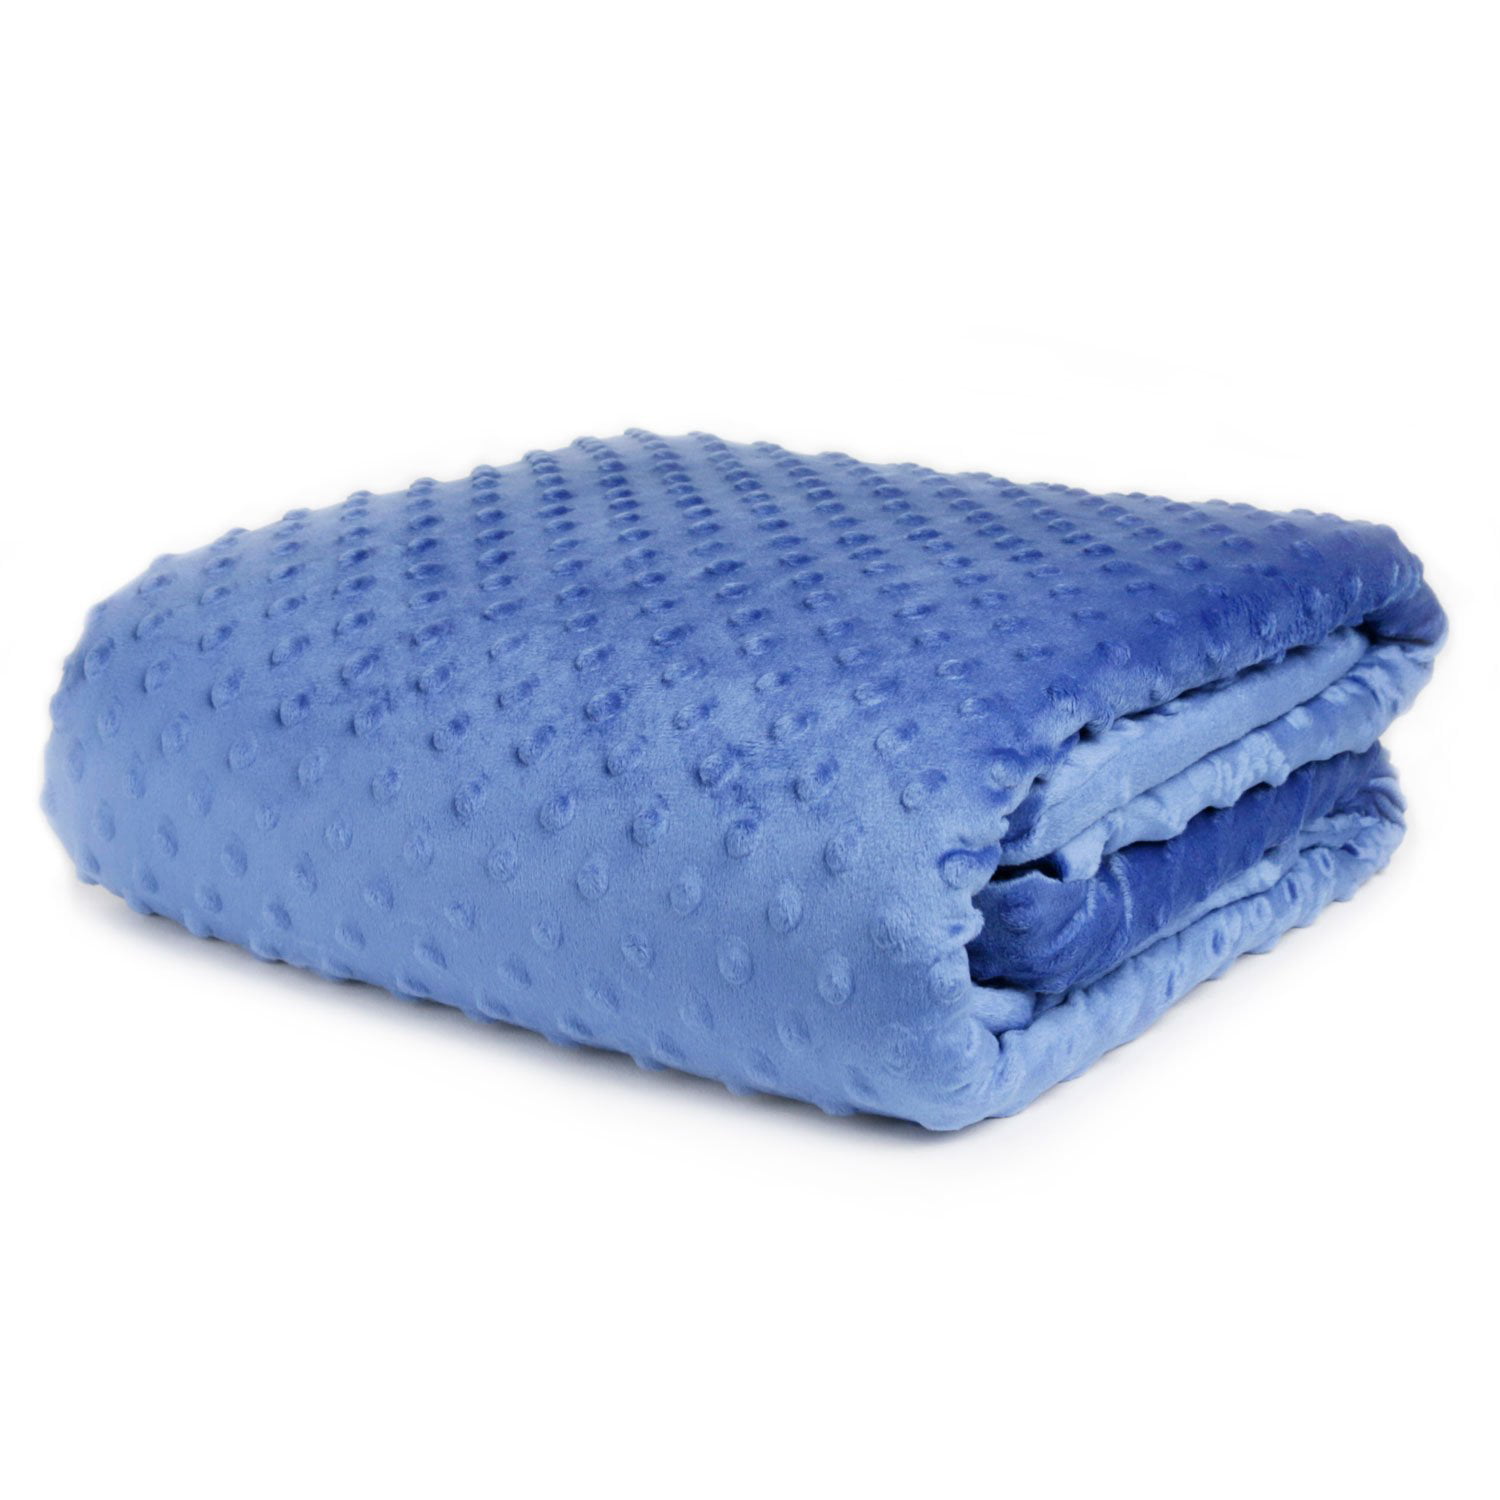 weighted blanket for kids